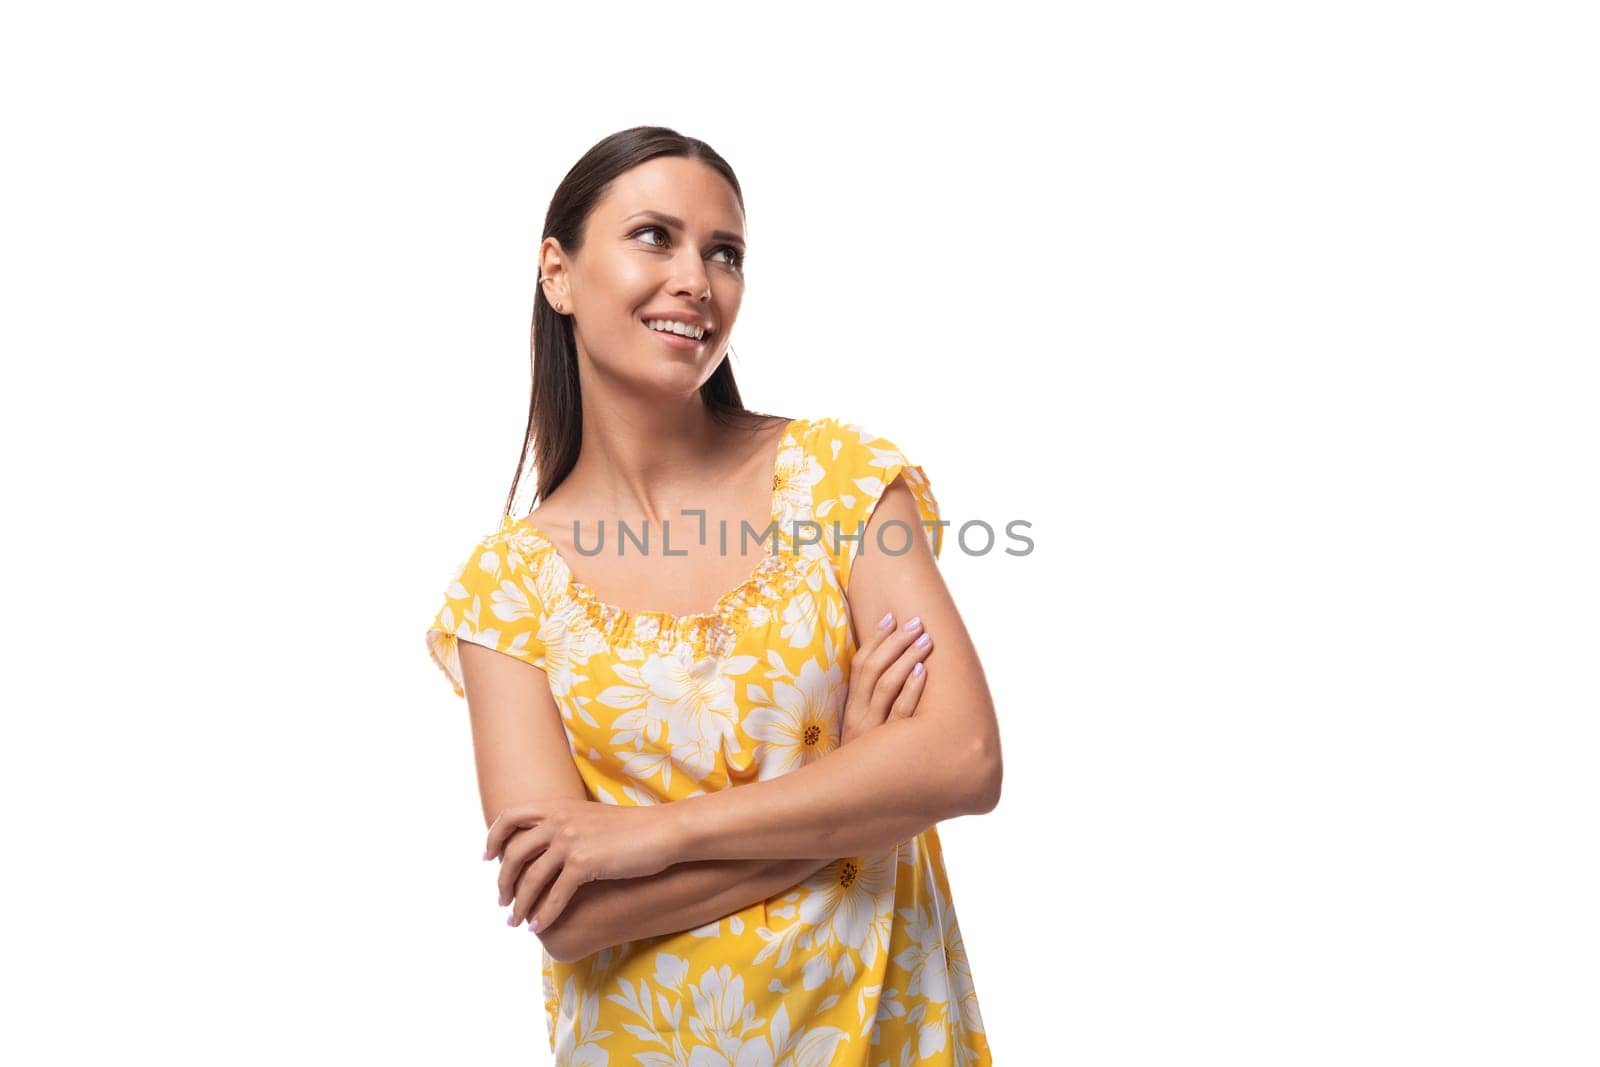 european positive charming brunette lady with loose hair wearing a yellow t-shirt with a flower print.